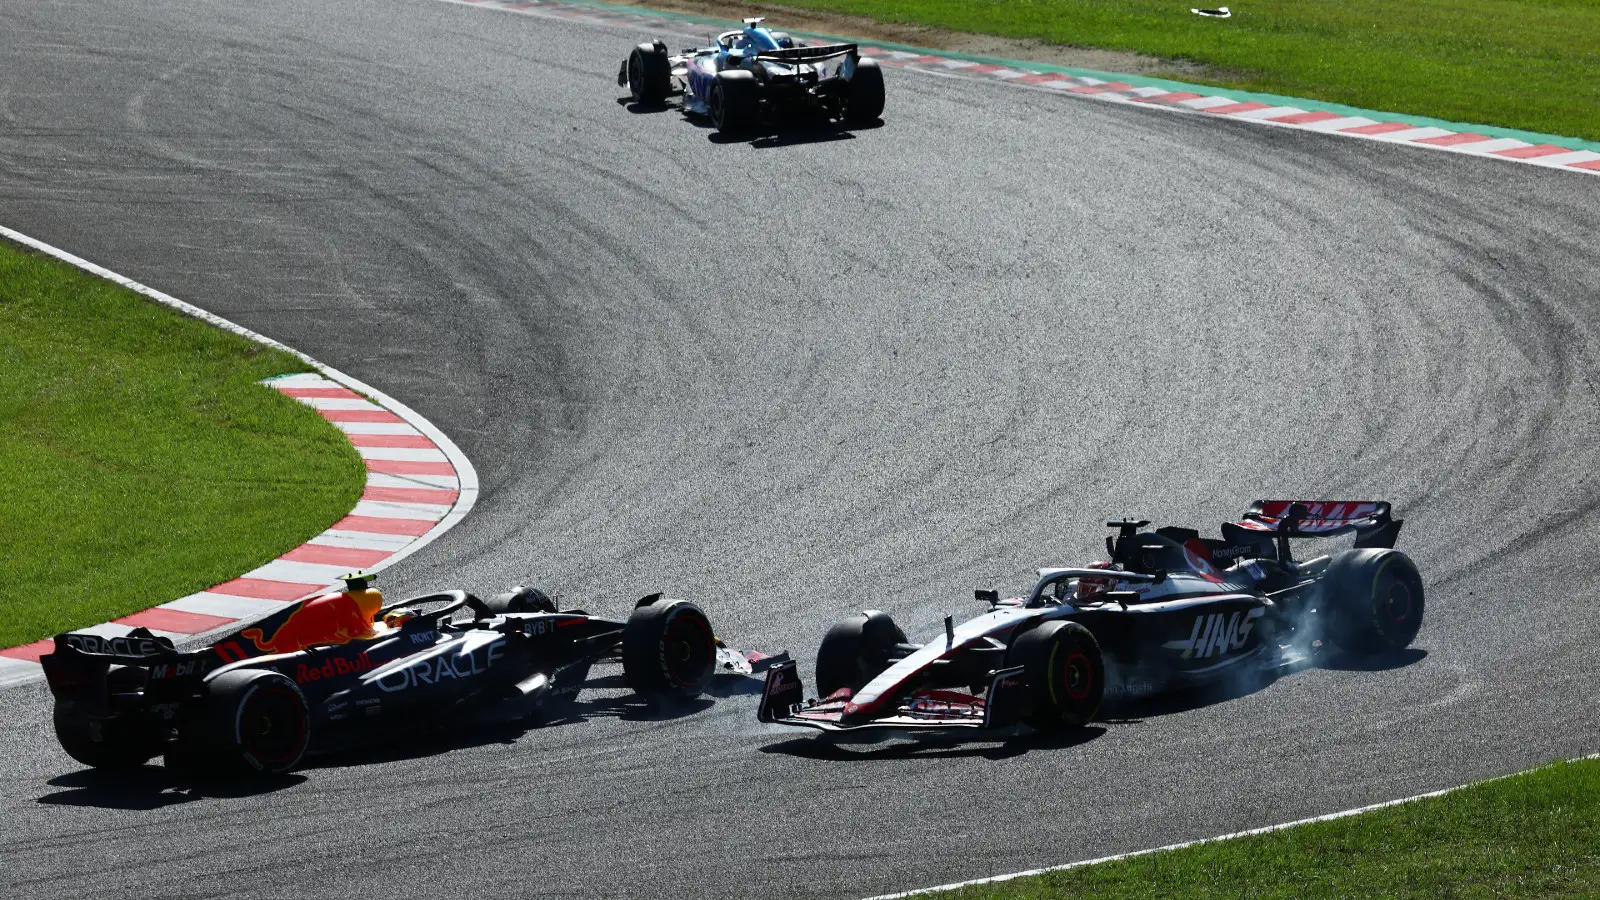 Haas driver Kevin Magnussen gets spun around by Red Bull's Sergio Perez during the Japanese Grand Prix.